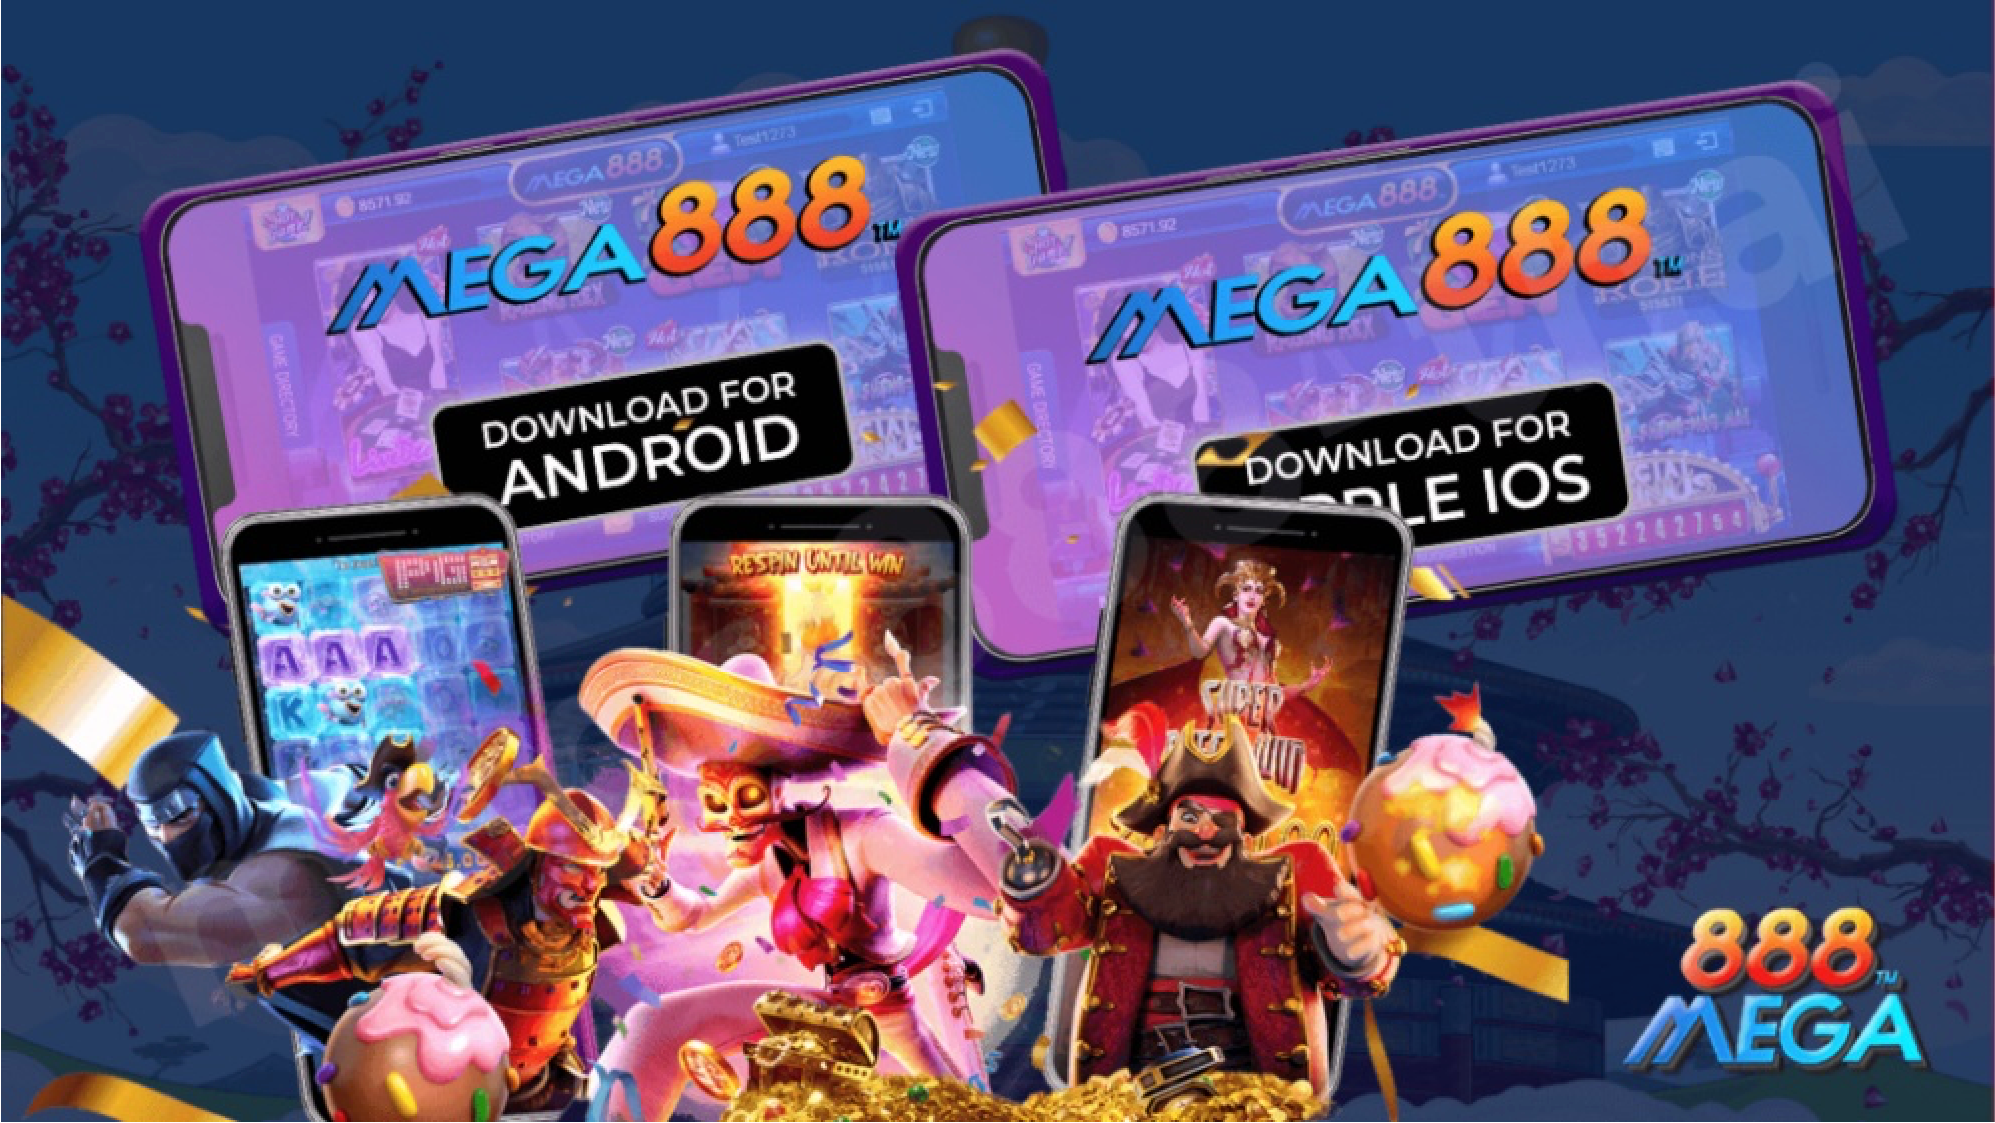 download mega888 android and ios to play game